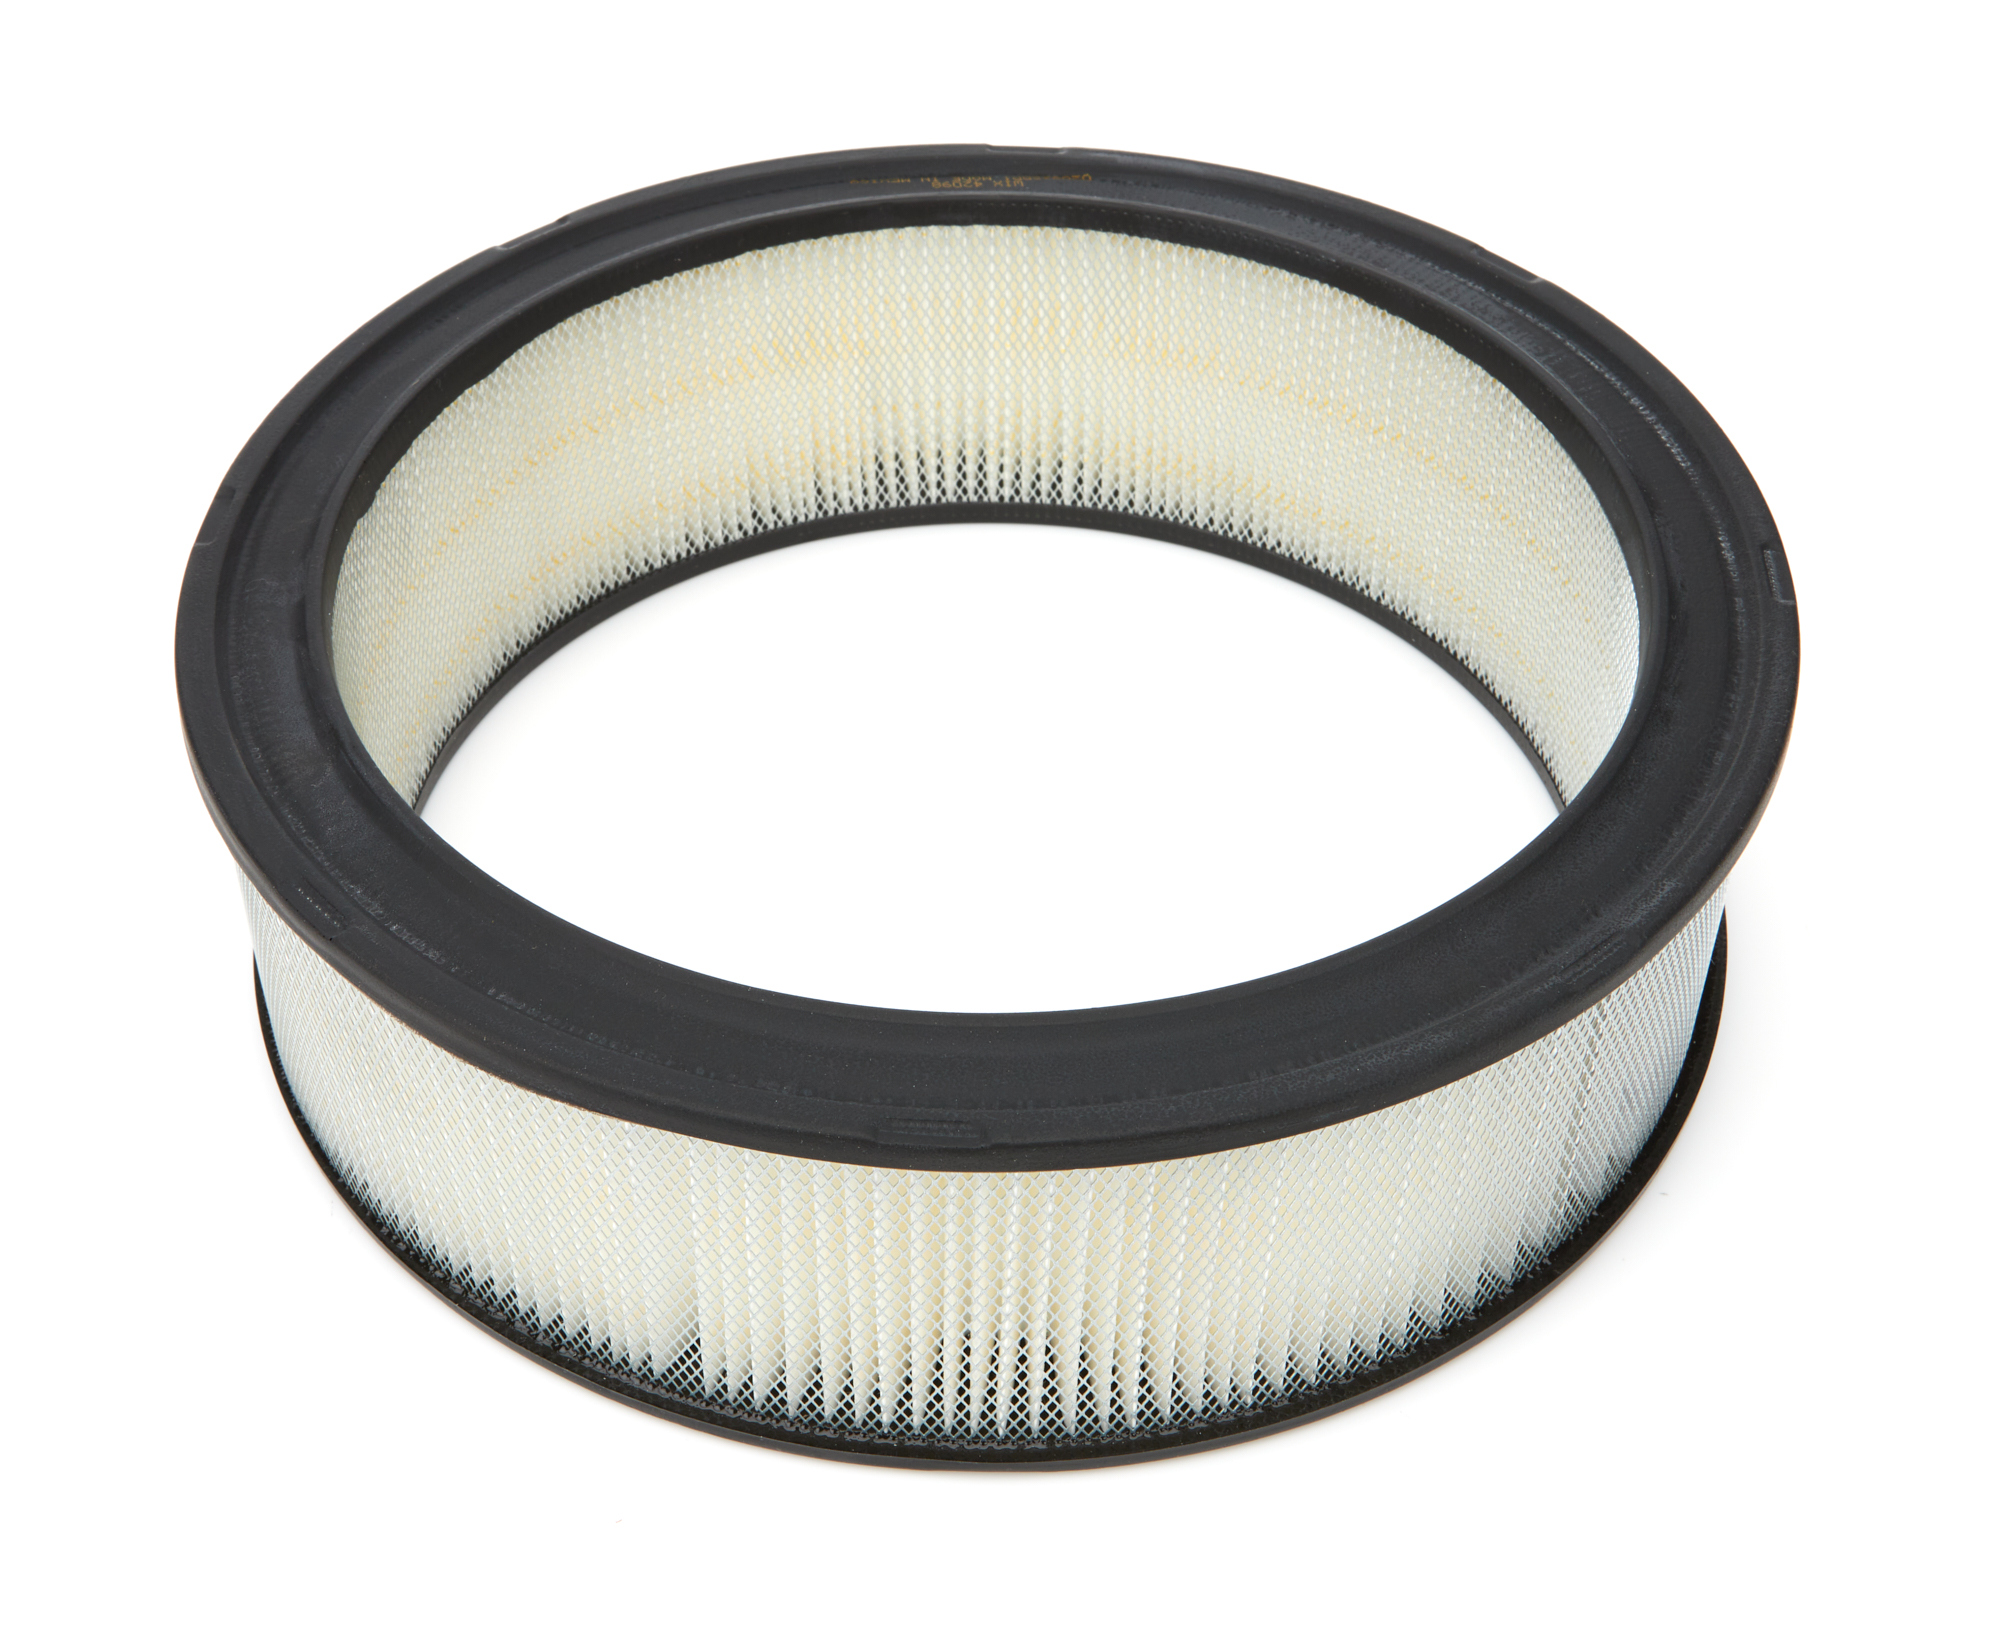 Wix Filters 42098 Air Filter Element, 12 in Diameter, 3.489 in Tall, Paper, White, Various GM Applications 1968-97, Each